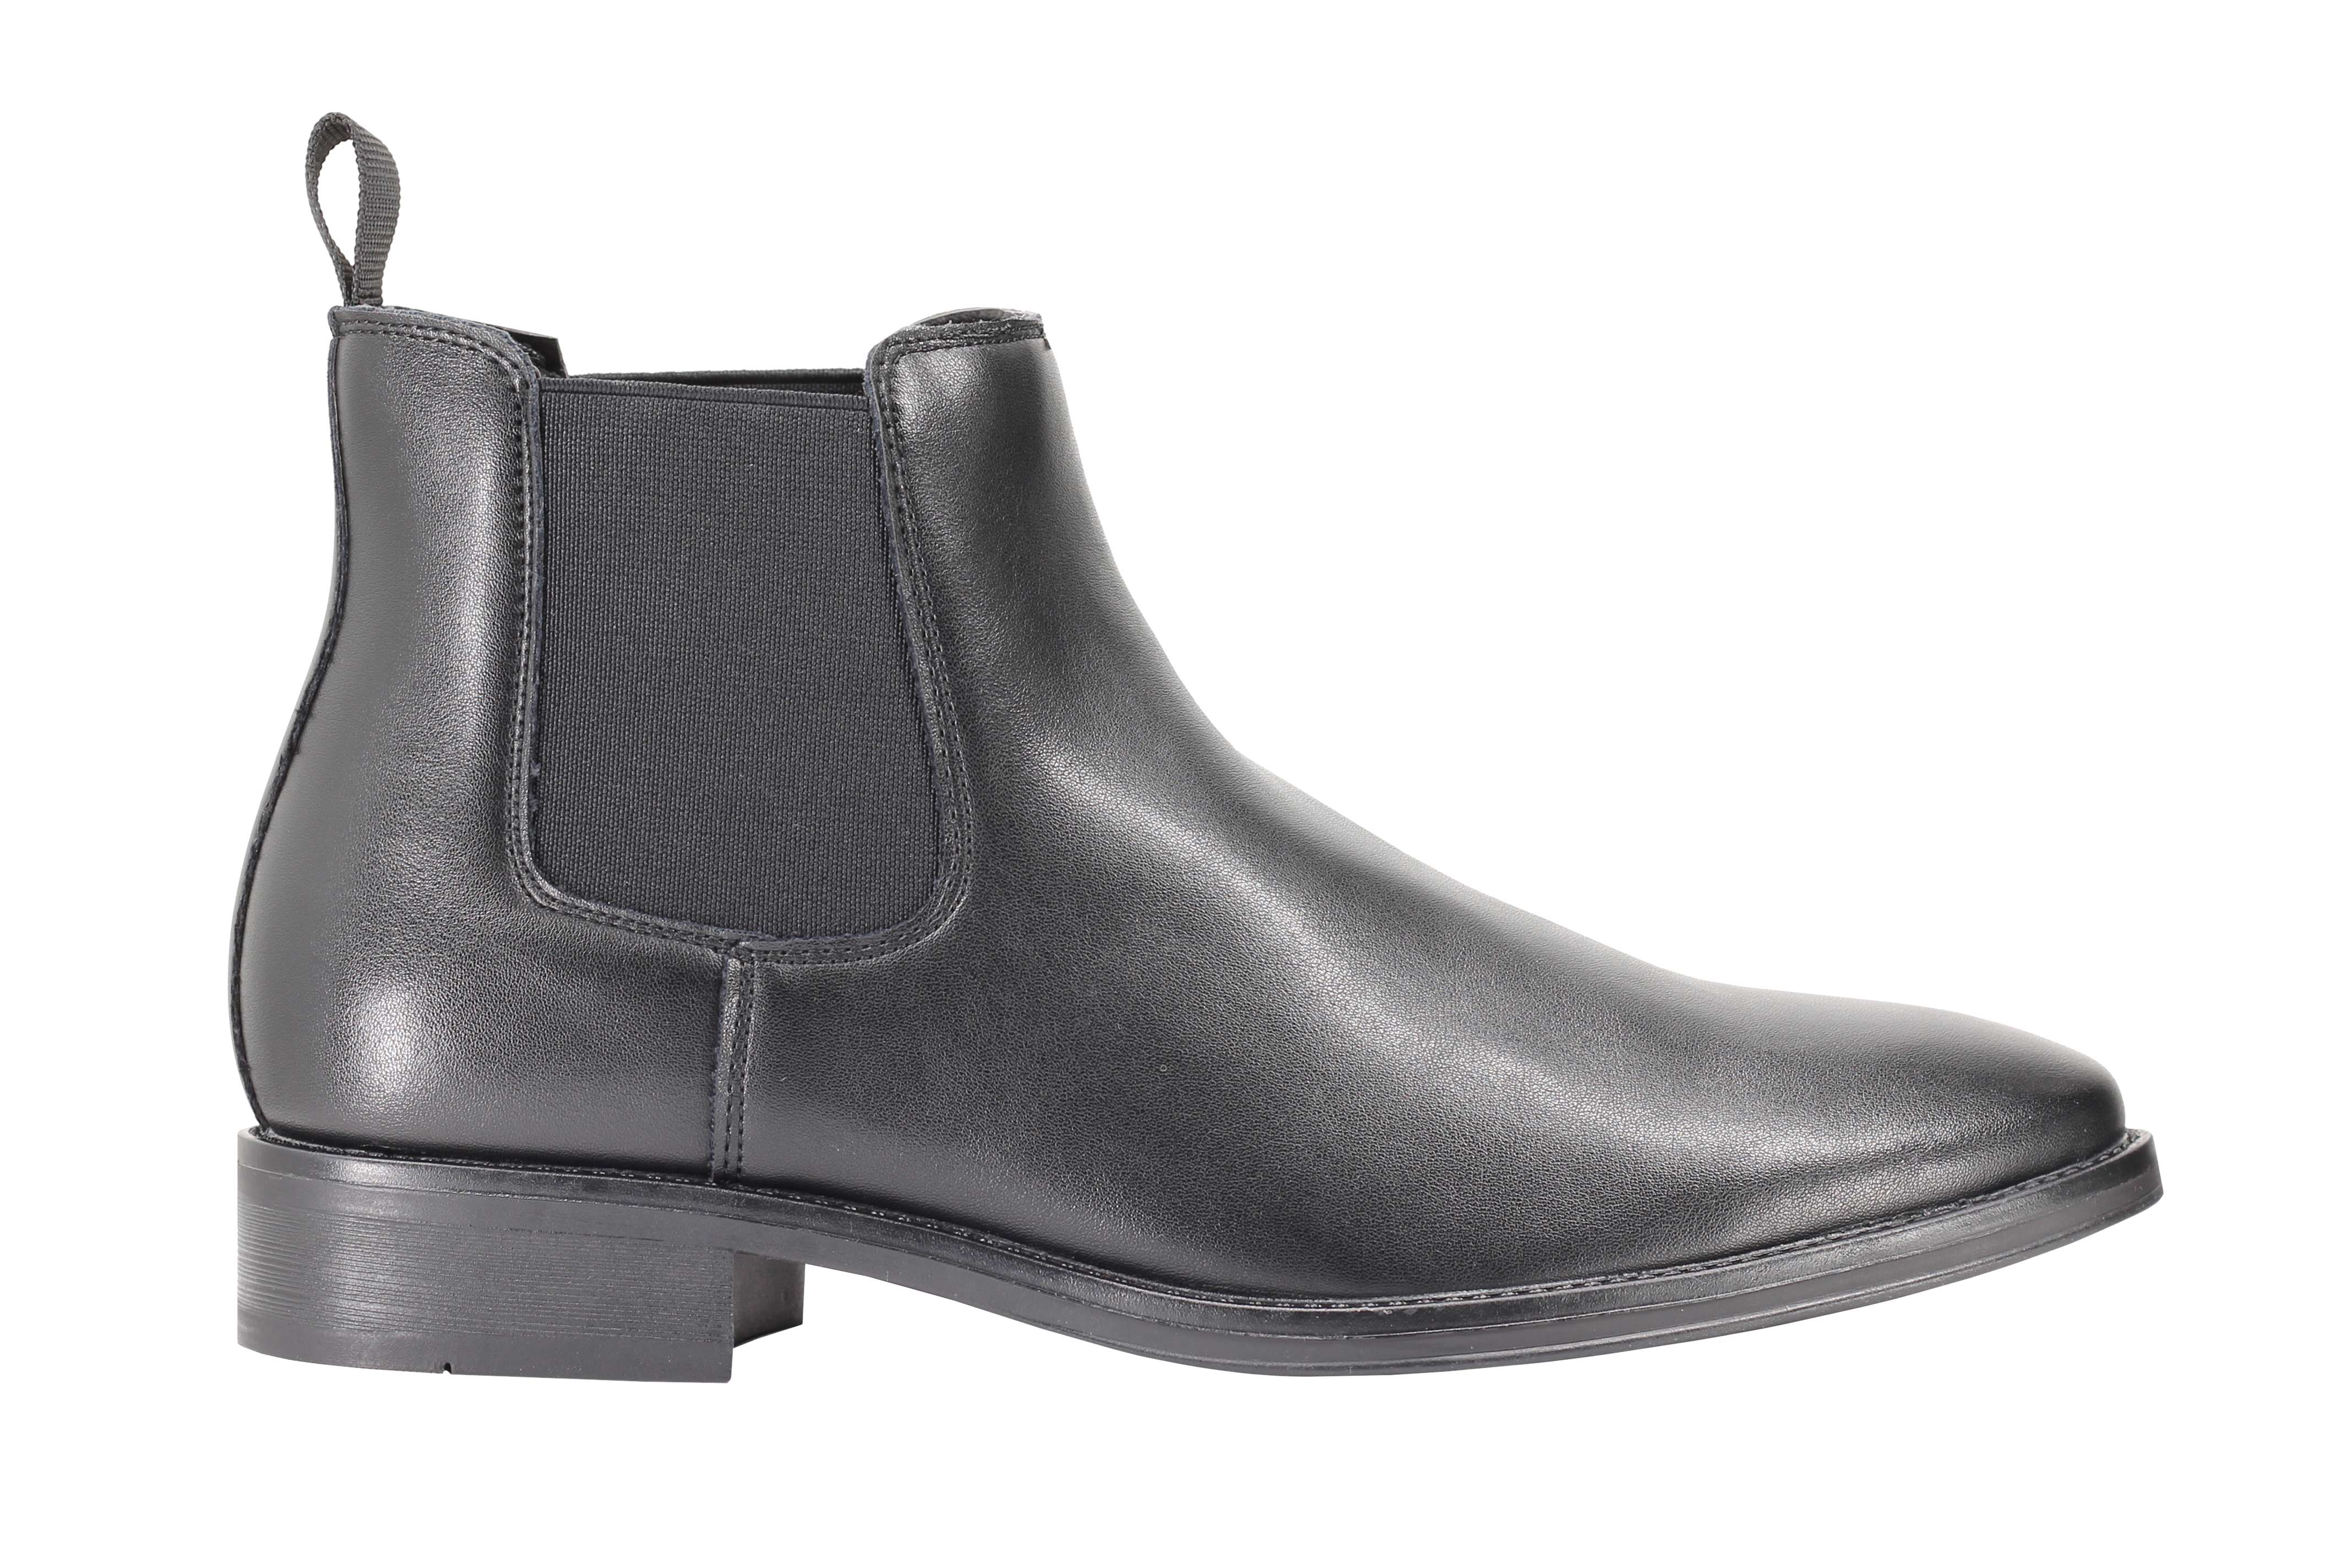 Chelsea Faux Leather Ankle Boots in black and brown